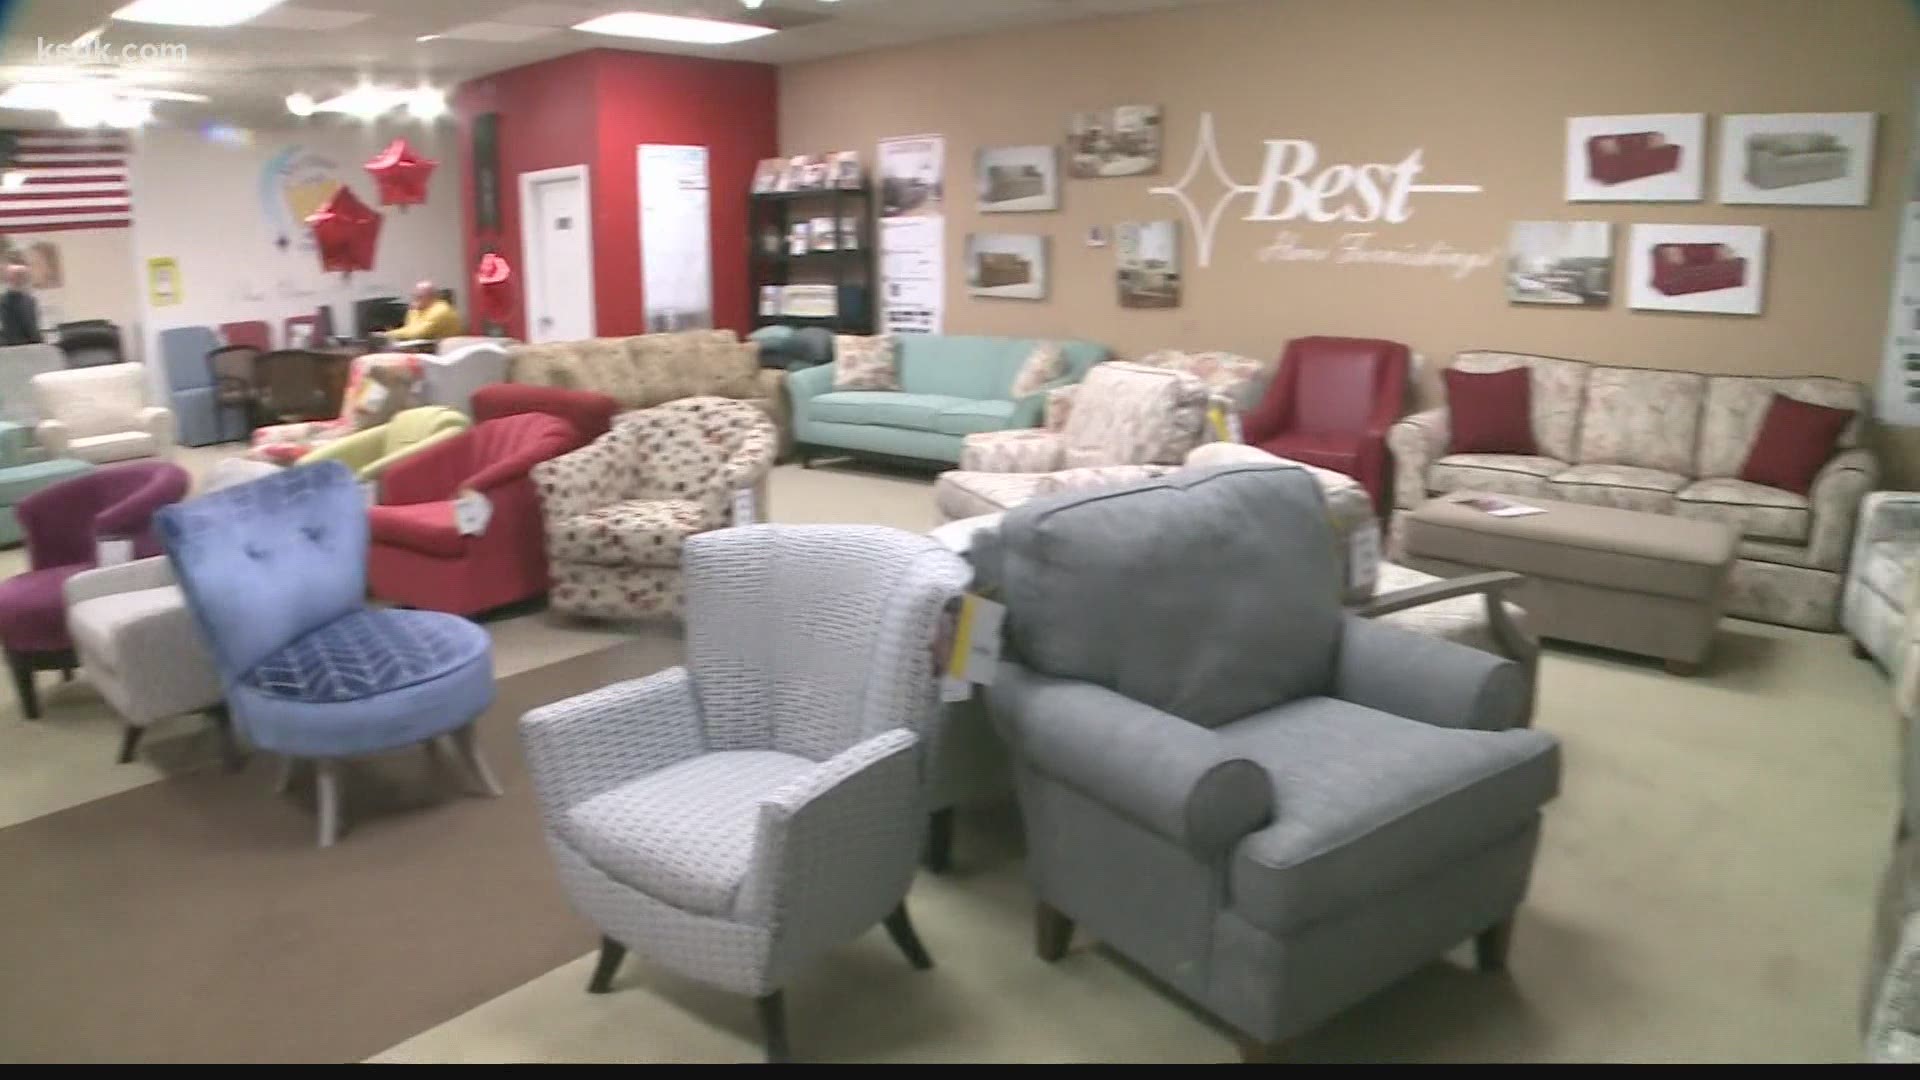 Black Friday starts today at Best Home Furnishings | 0